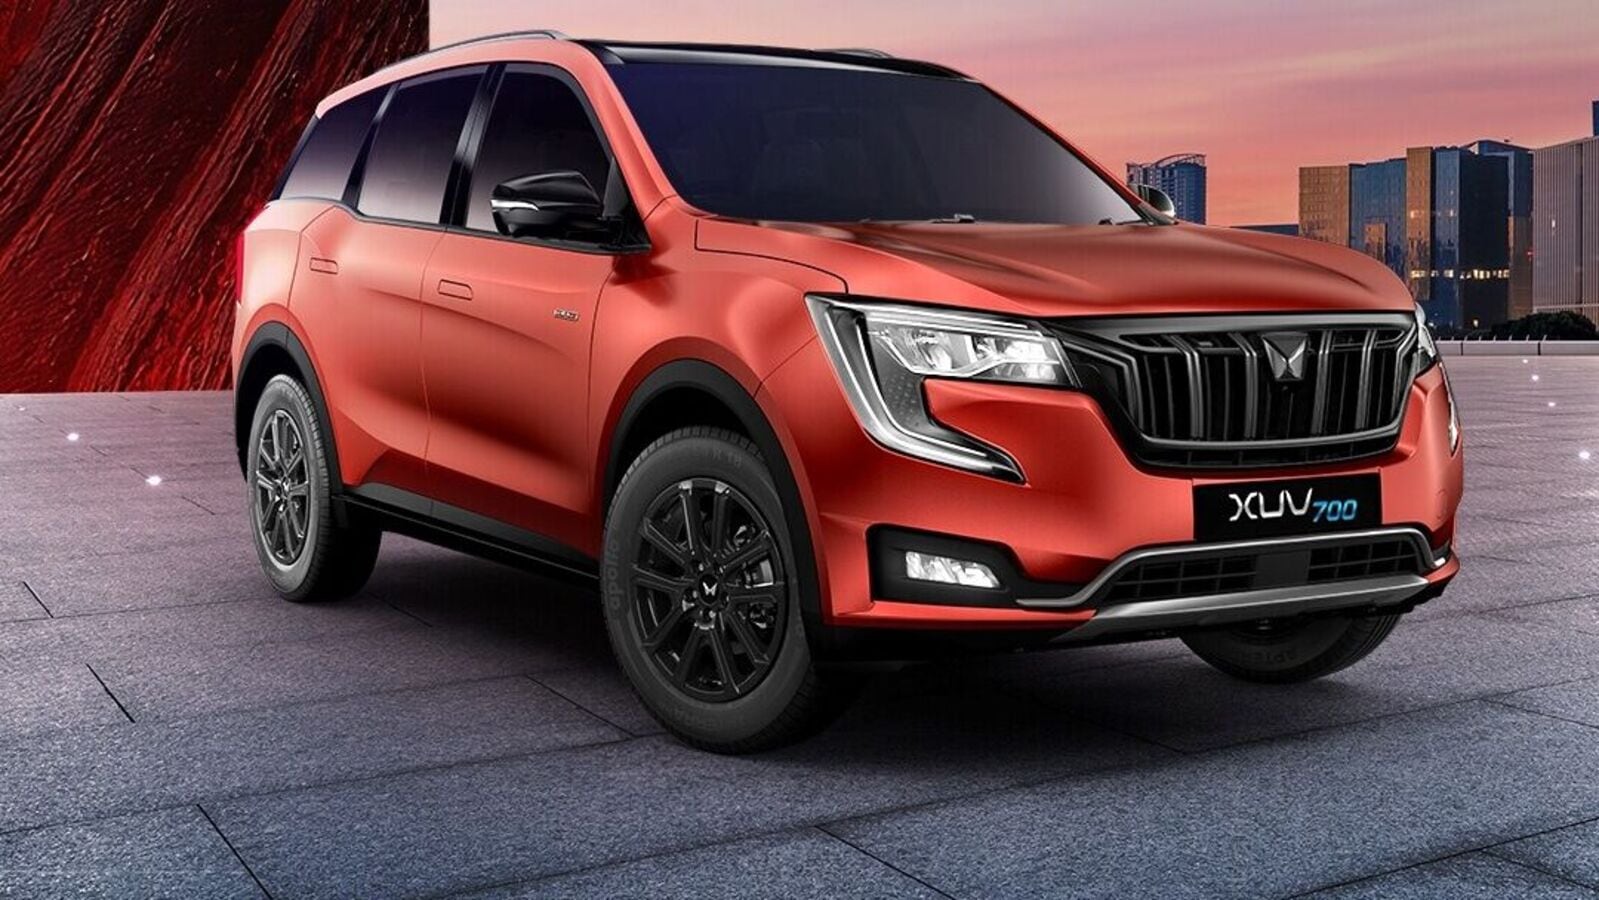 Mahindra XUV700 Blaze Edition launched at ₹24.24 lakh. Check what’s new